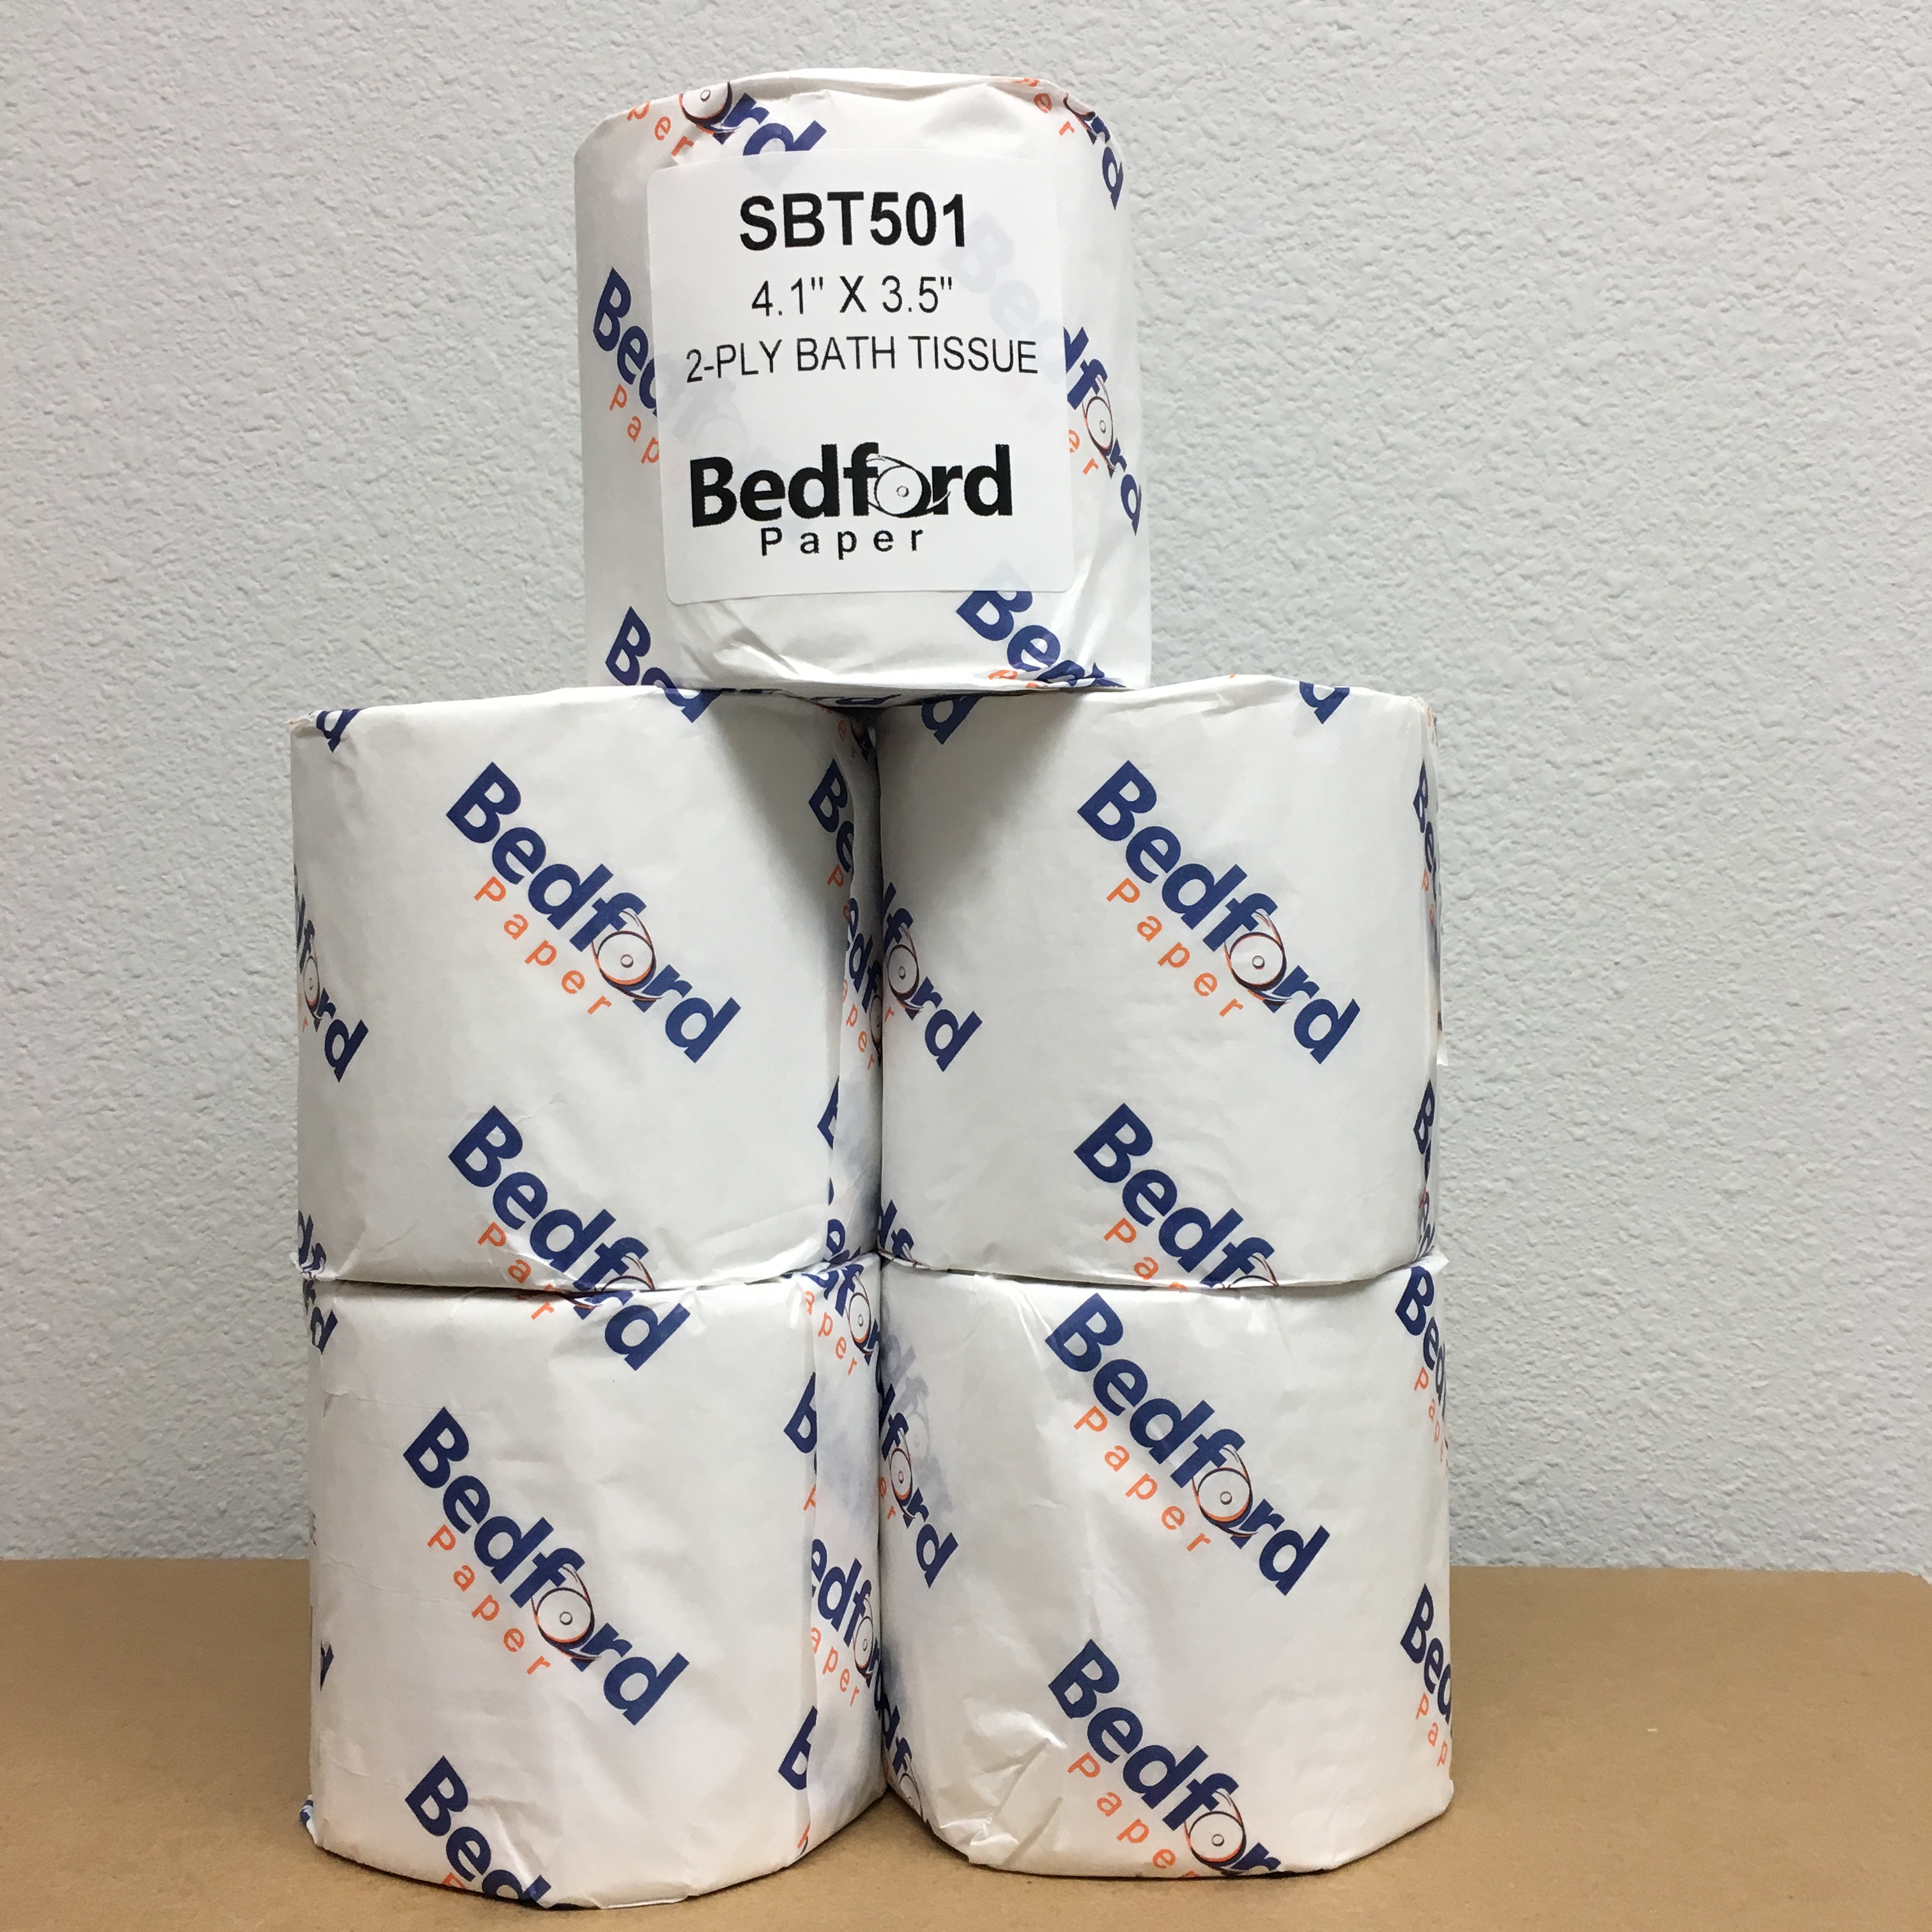 TOILET TISSUE 2-PLY BEDFORD 4.1 X 3.50 500 SHEETS PER